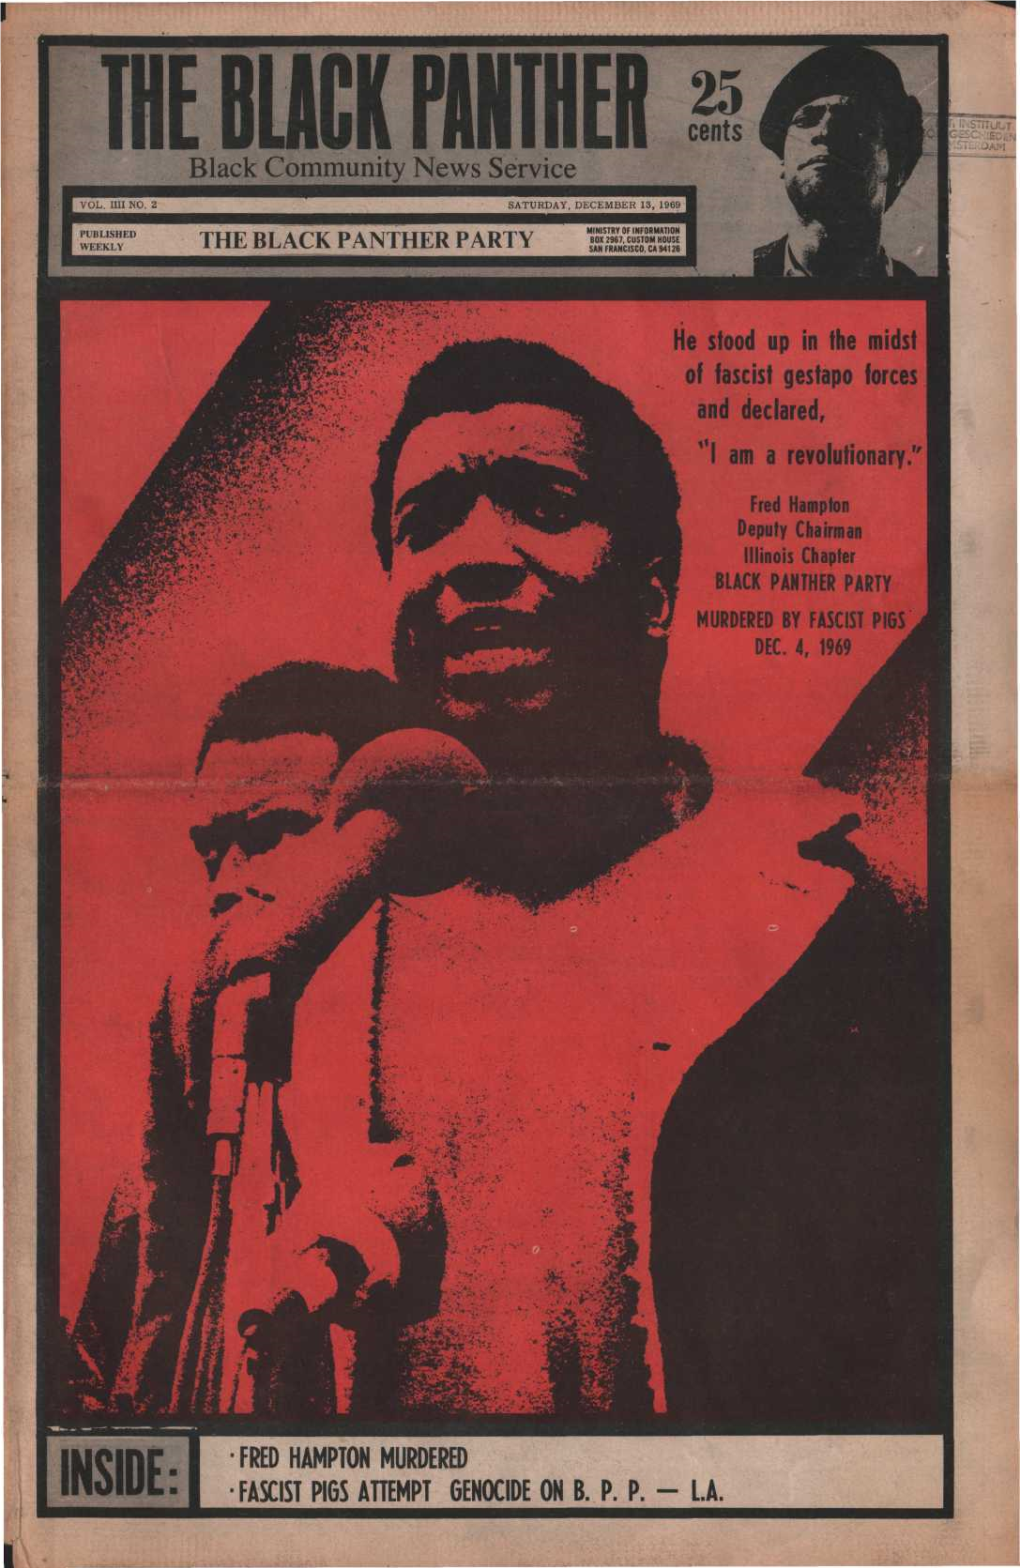 Fred Hampton Deputy Chairman Illinois Chapter BLACK PANTHER PARTY MURDERED by FASCIST PIGS DEC